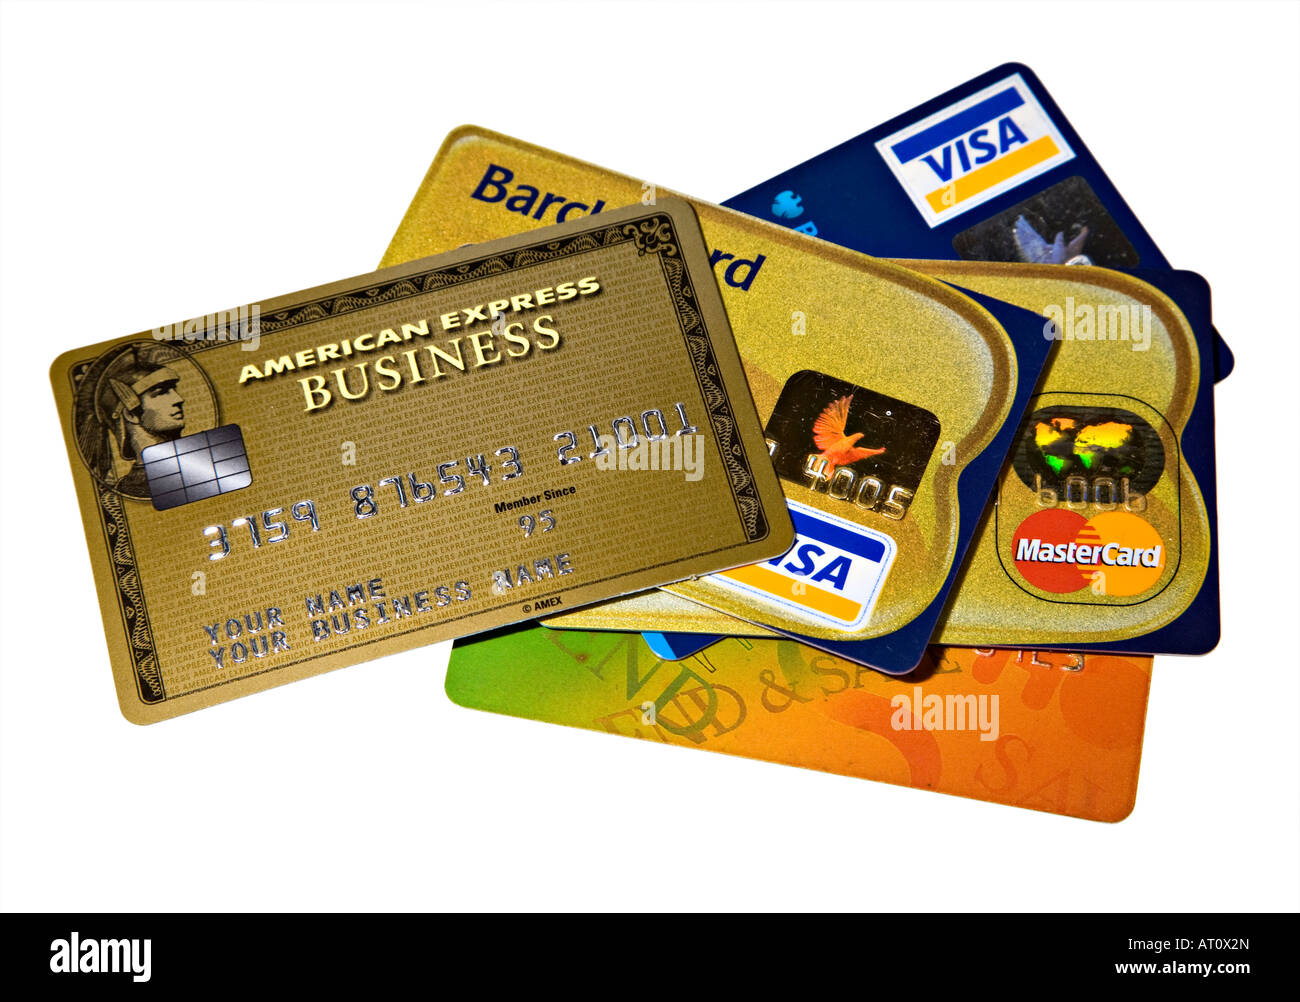 Plastic credit and debit cards from Visa Mastercard and American Express with Your Name and Your Business label Stock Photo